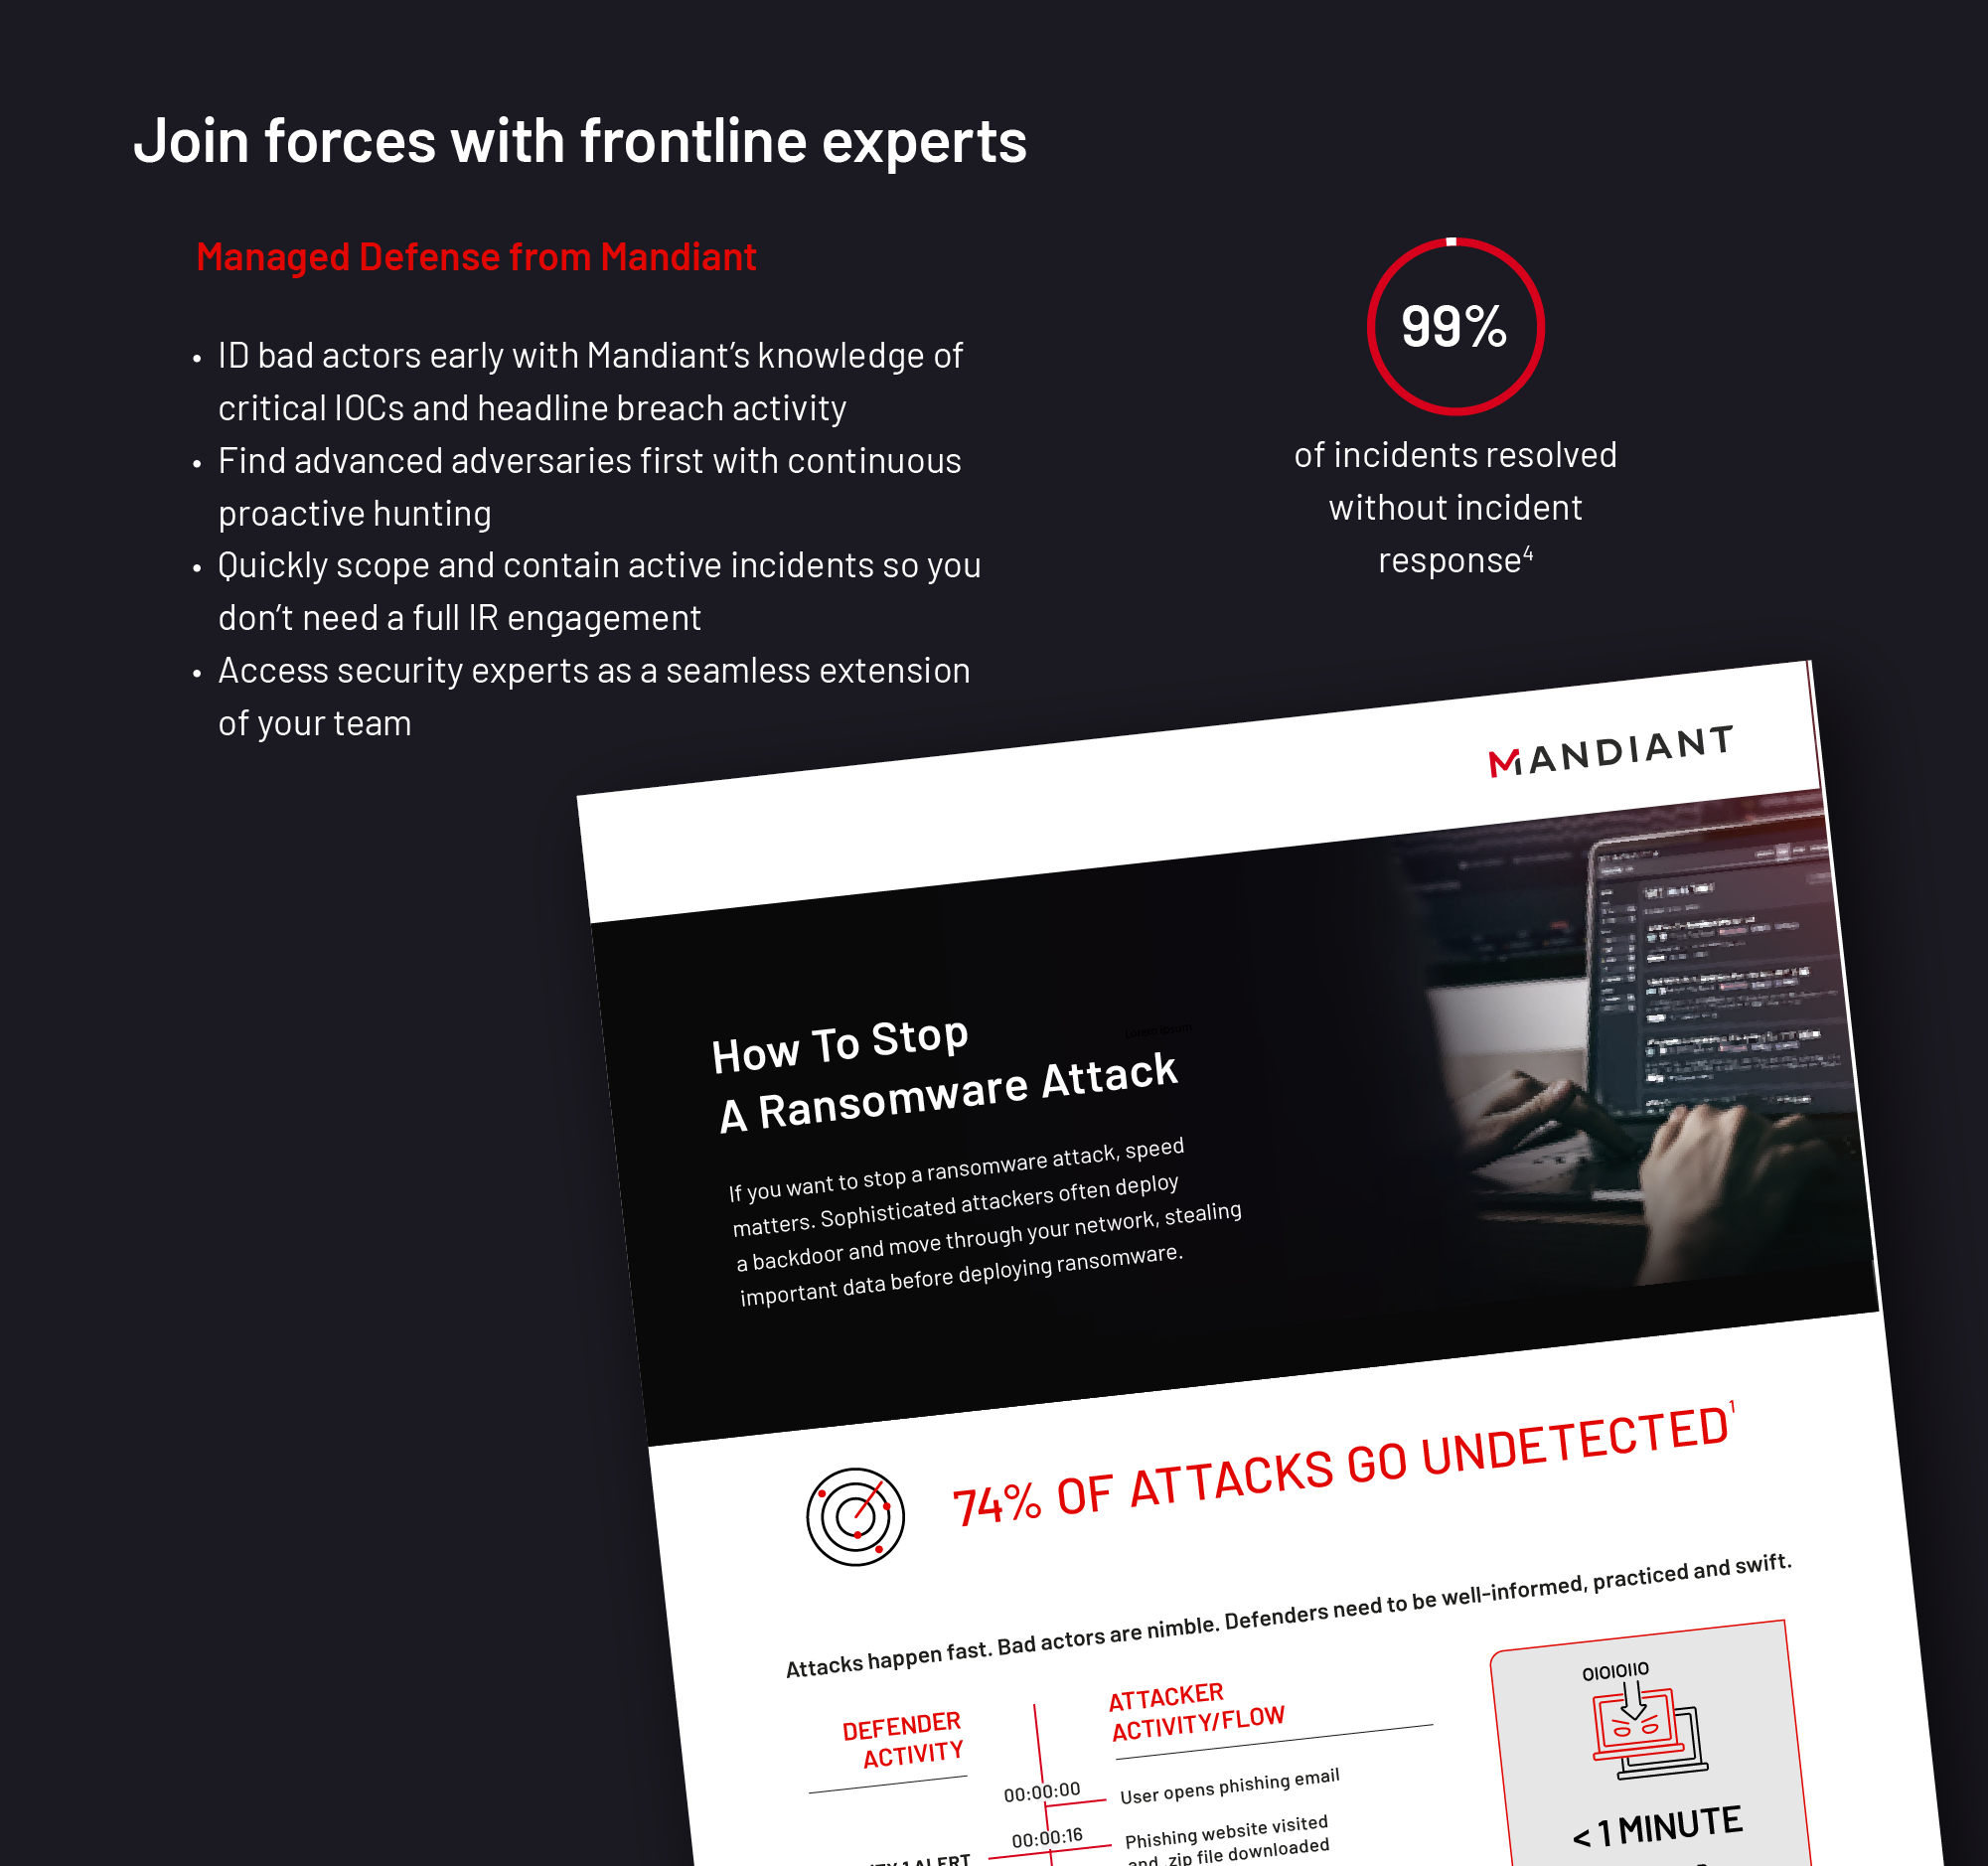 Join forces with frontline experts